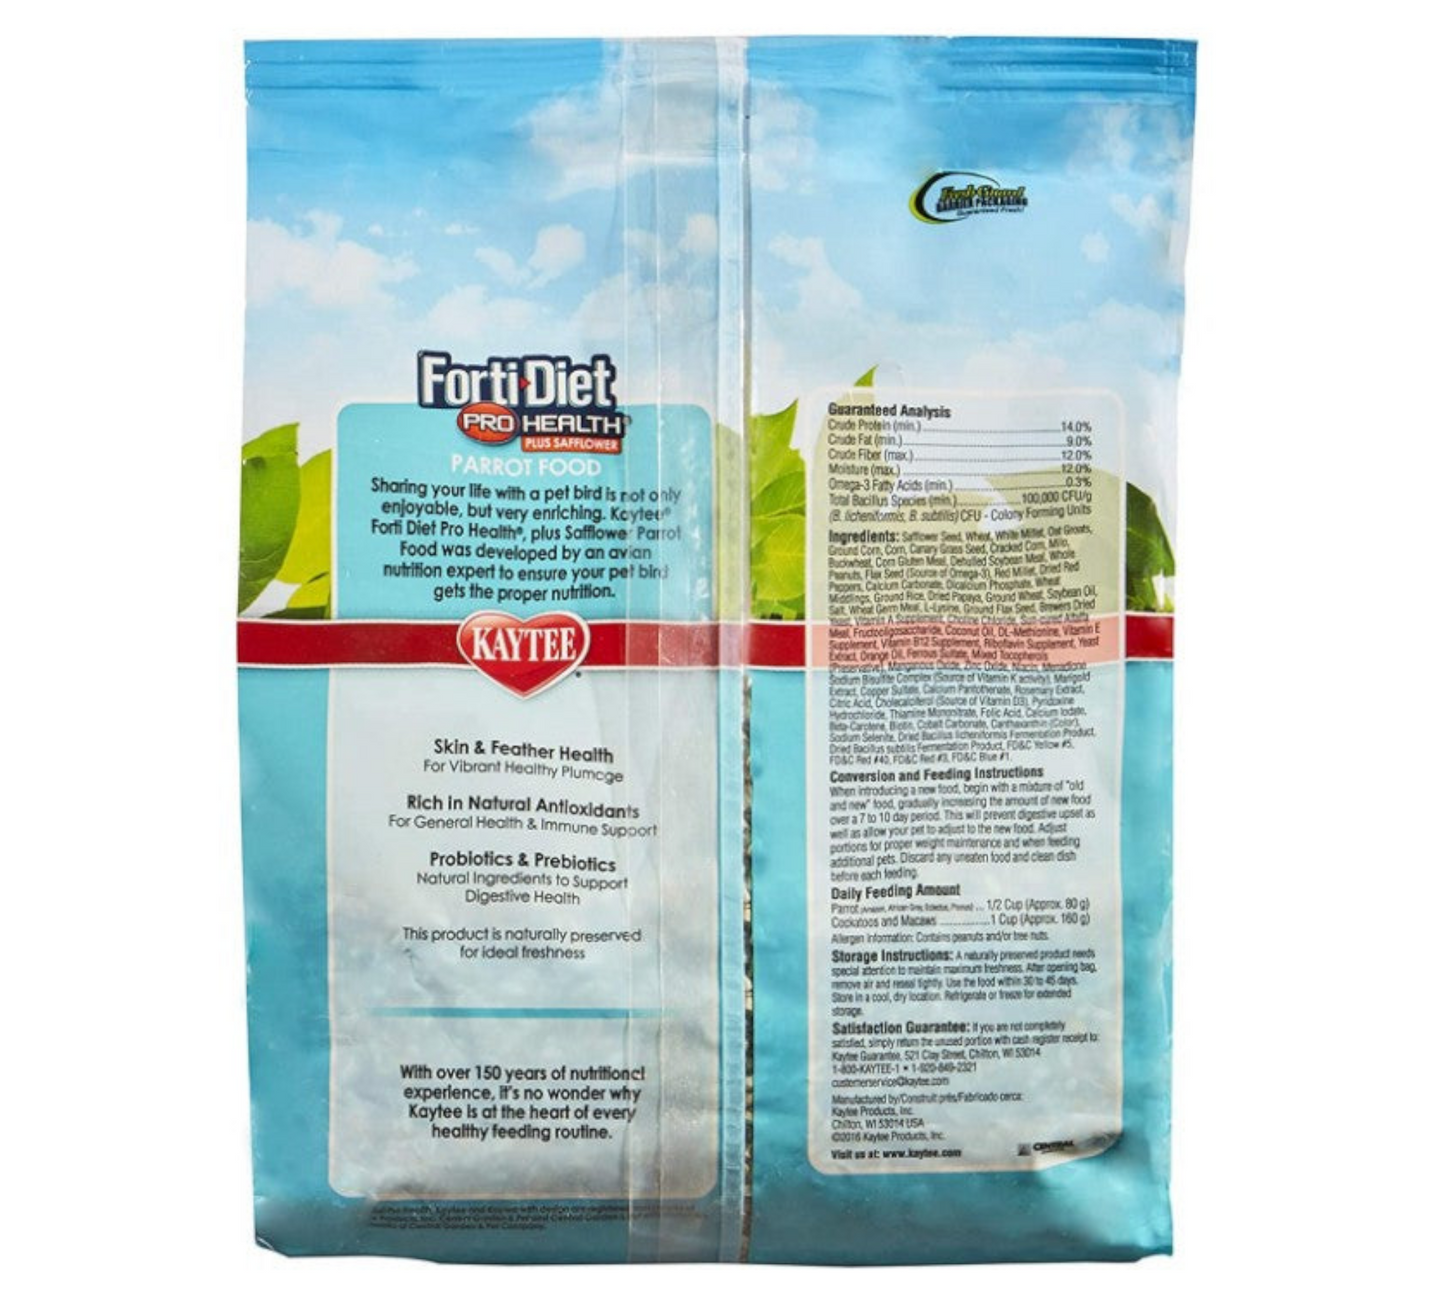 Kaytee Forti Diet Pro Health for Parrots: Healthy Support